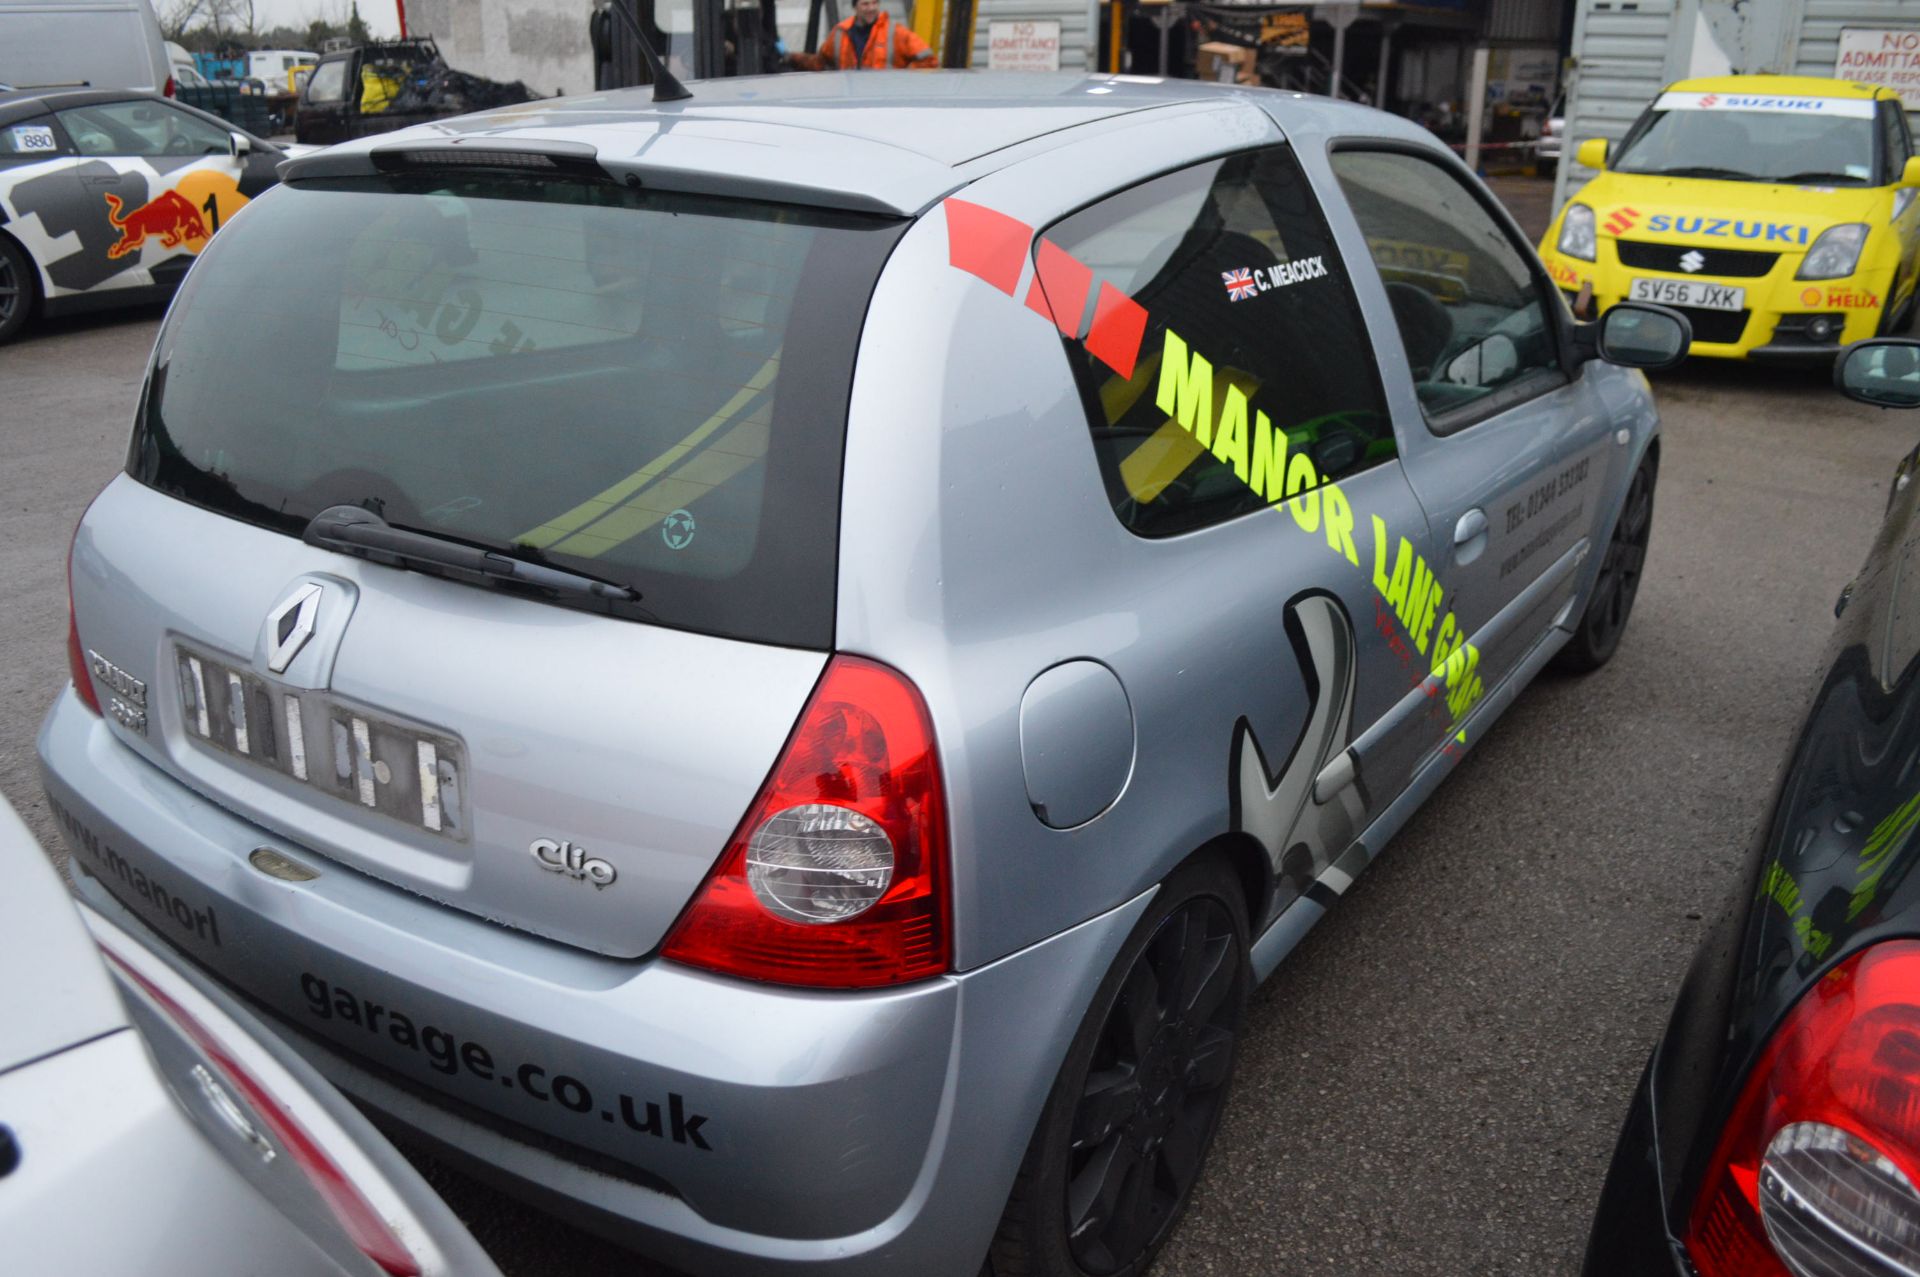 2002/02 REG RENAULT CLIO 2.0 SPORT TRACK/RACE CAR STRIPPED FOR TRACK DAYS - Image 5 of 14